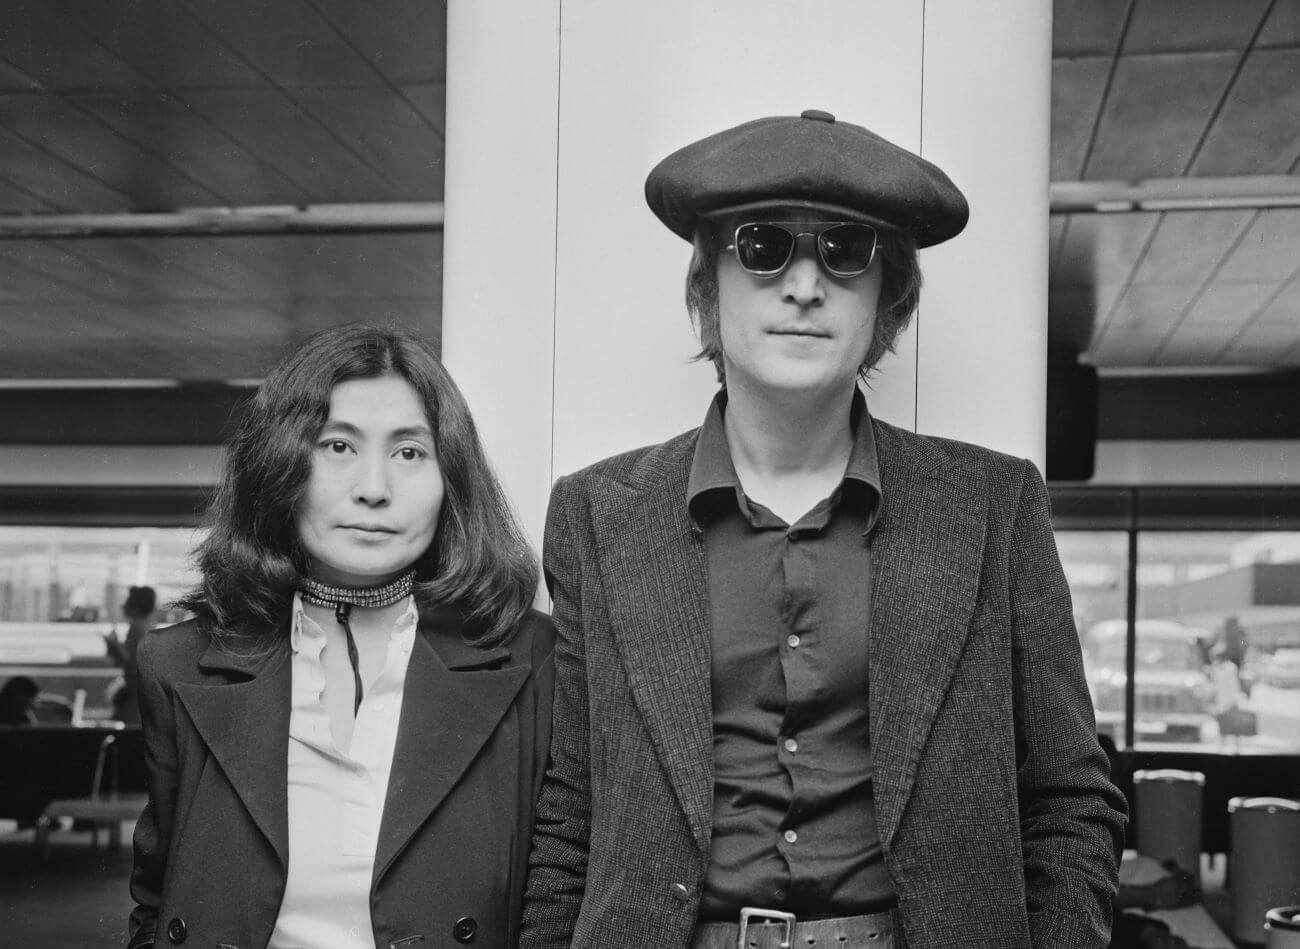 Yoko Ono and John Lennon stand next to each other at the airport. Lennon wears a hat and sunglasses.